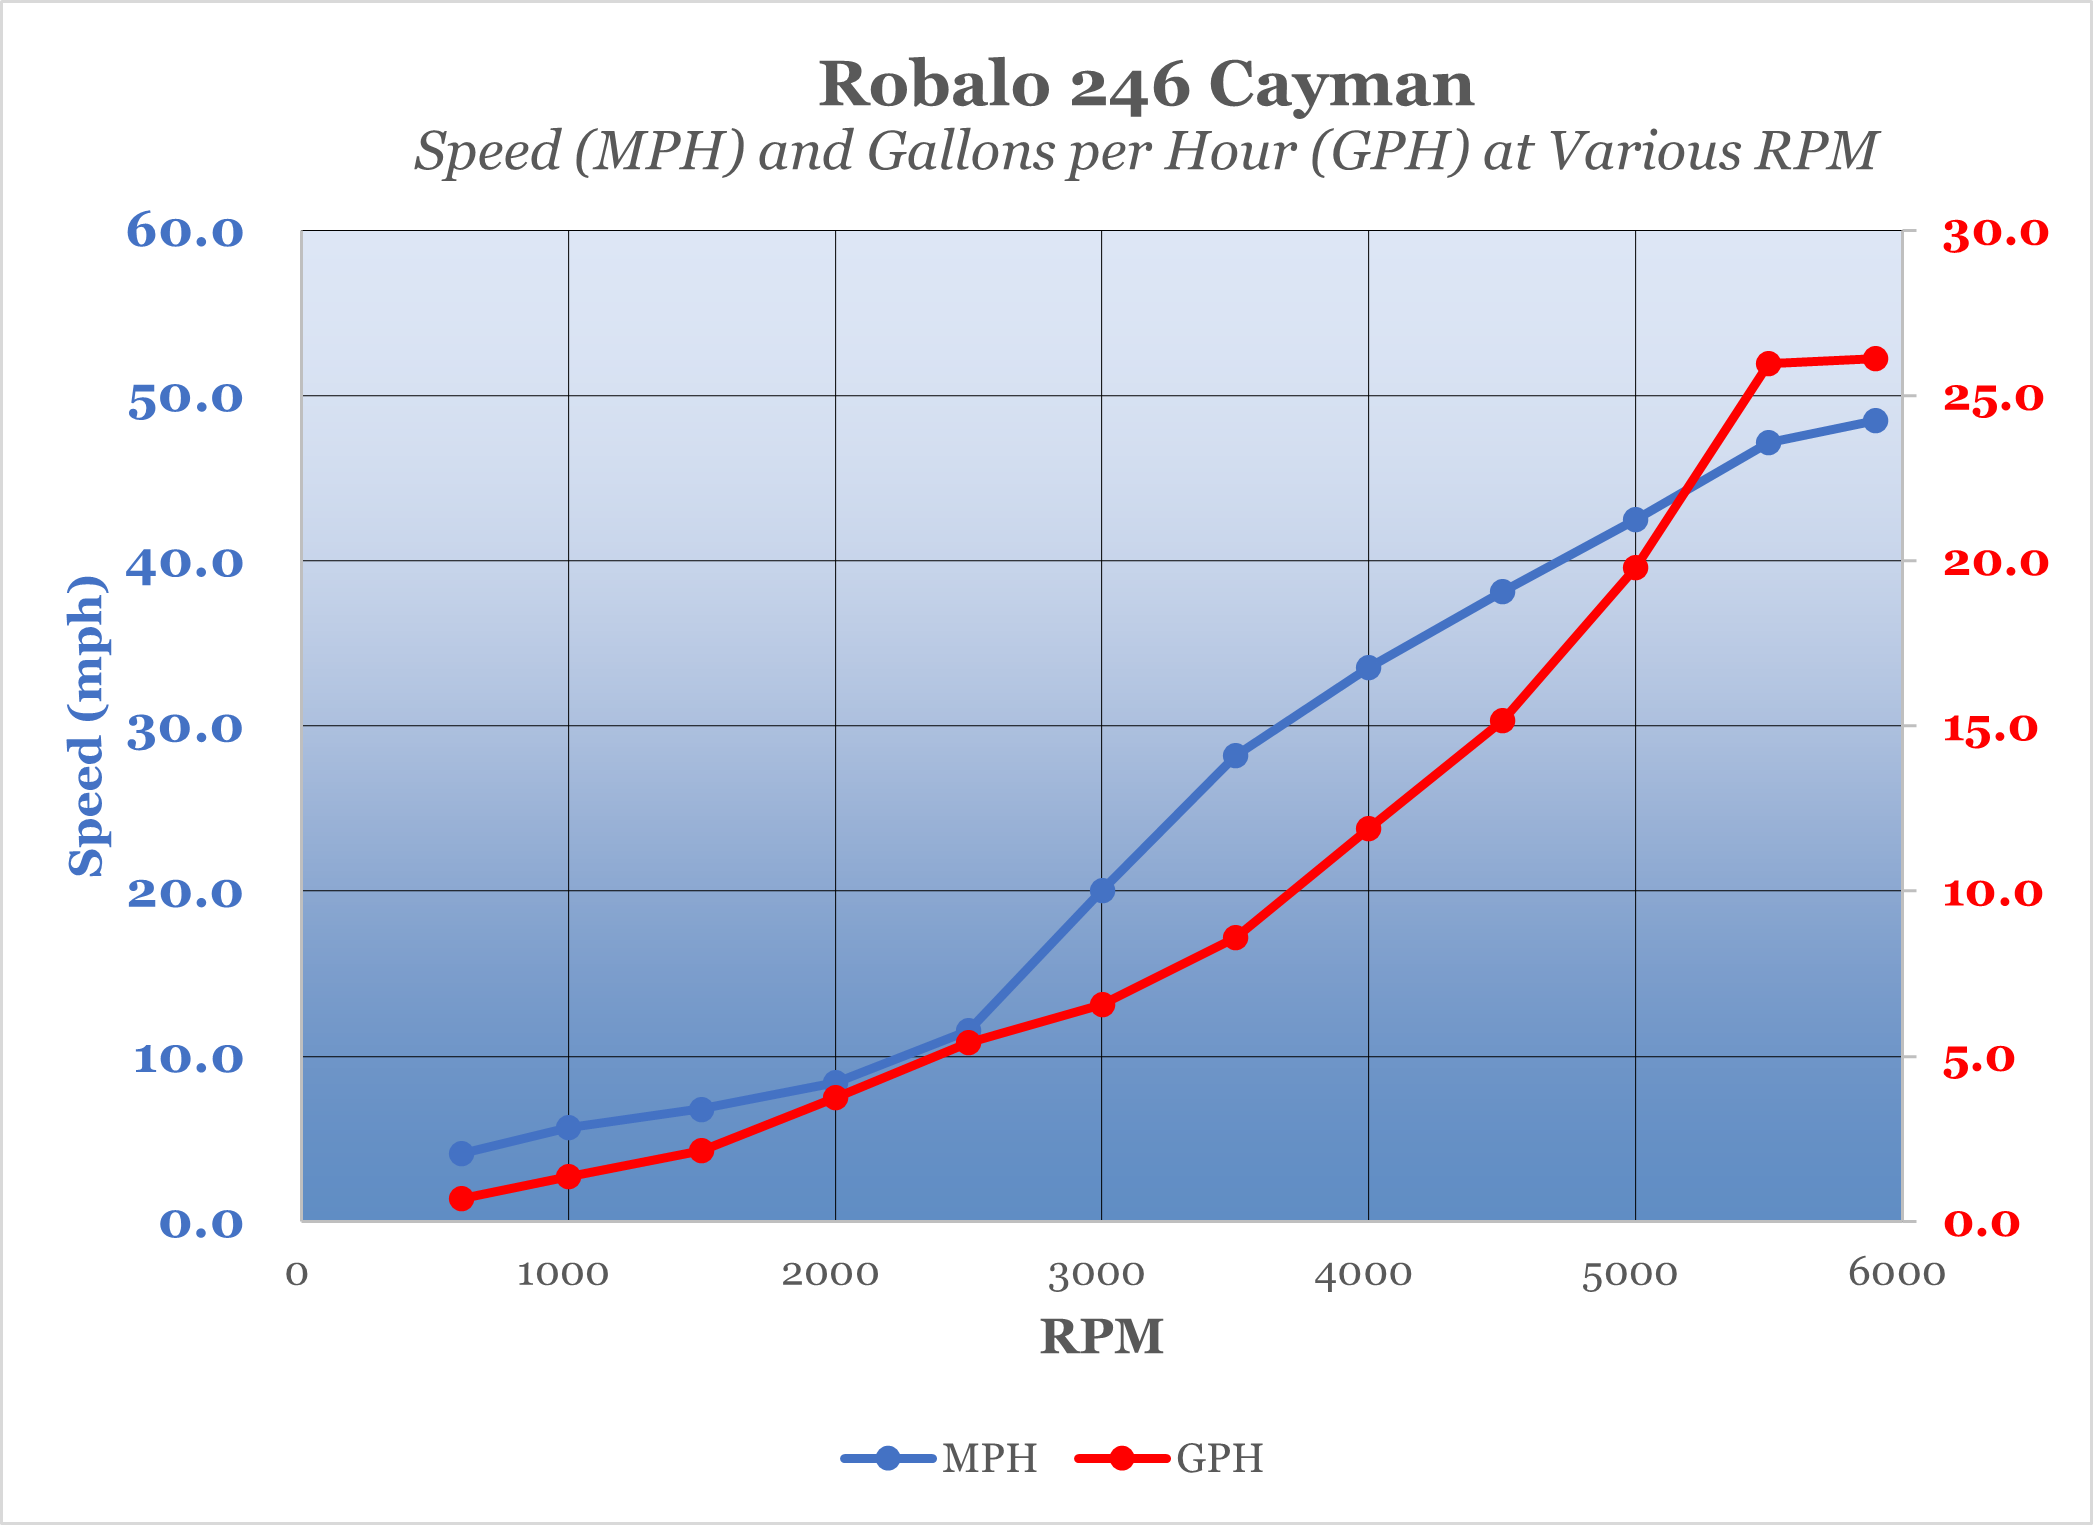 Robalo 246 Cayman mph and gph per hour performance chart